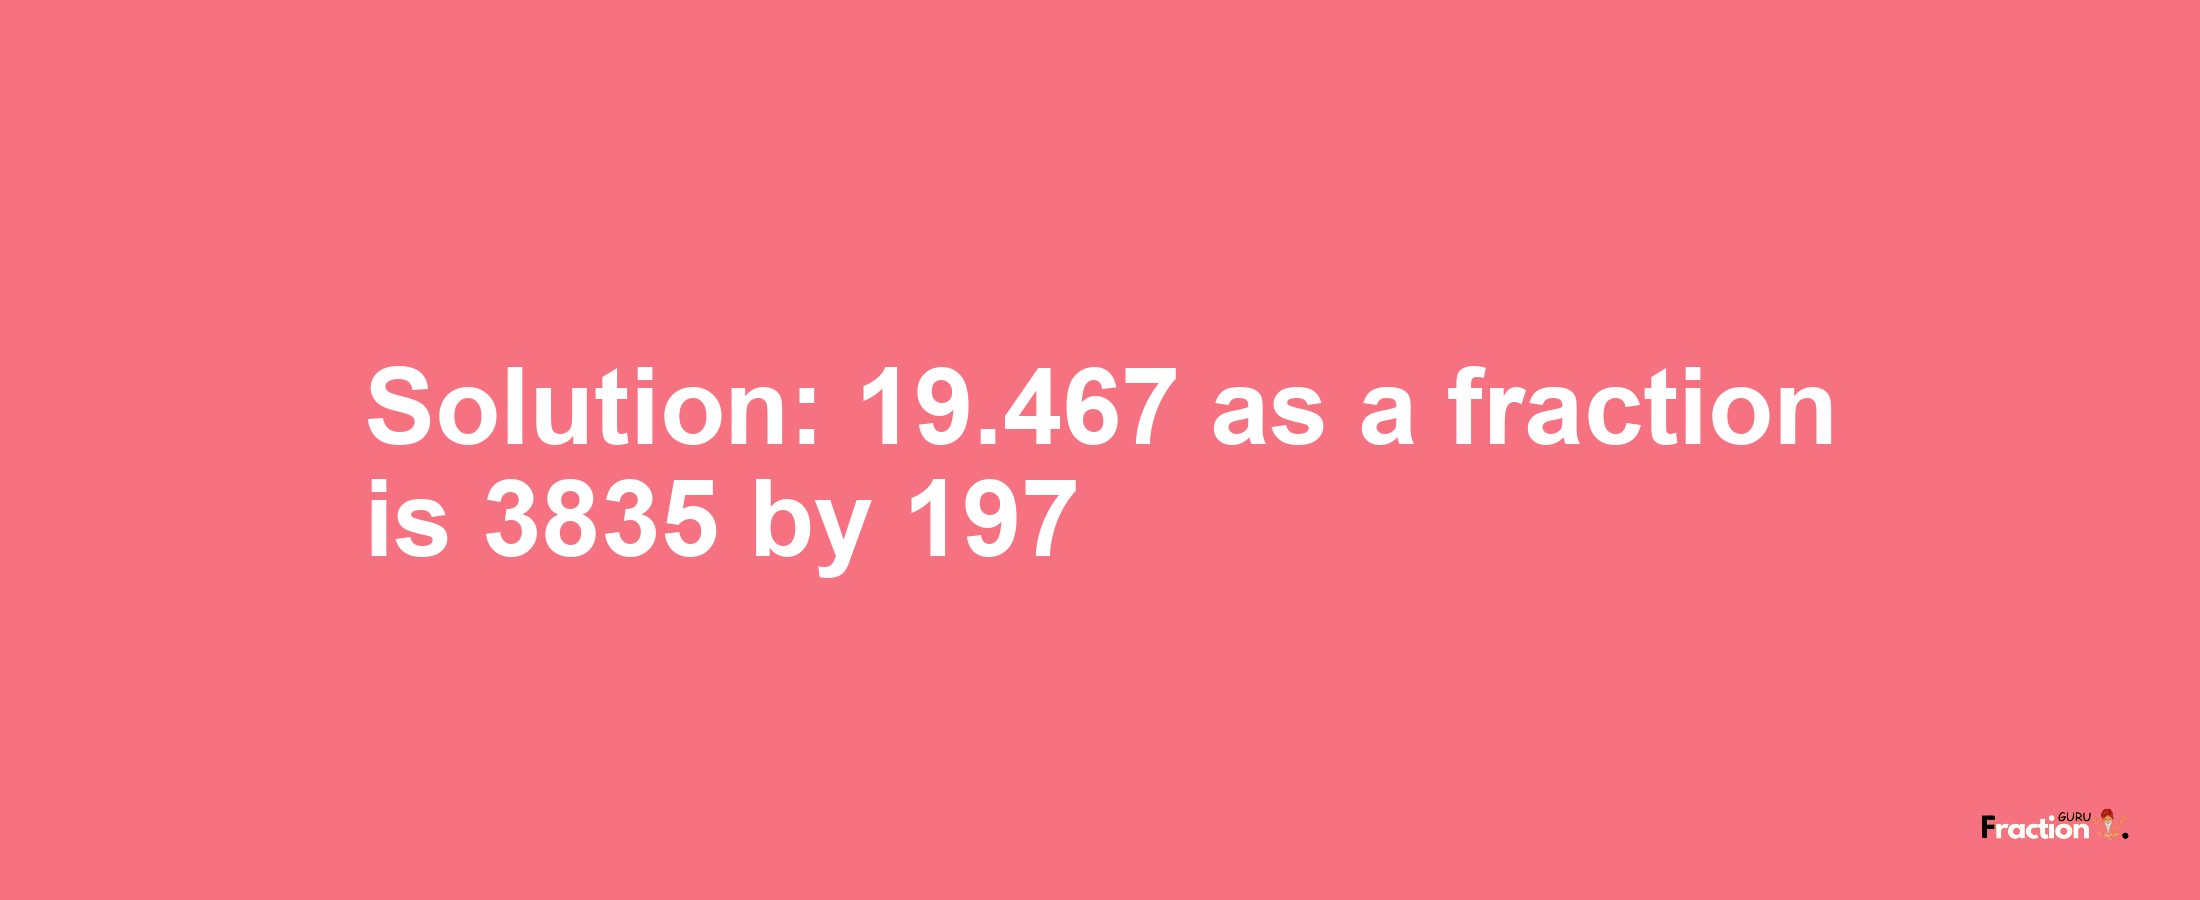 Solution:19.467 as a fraction is 3835/197